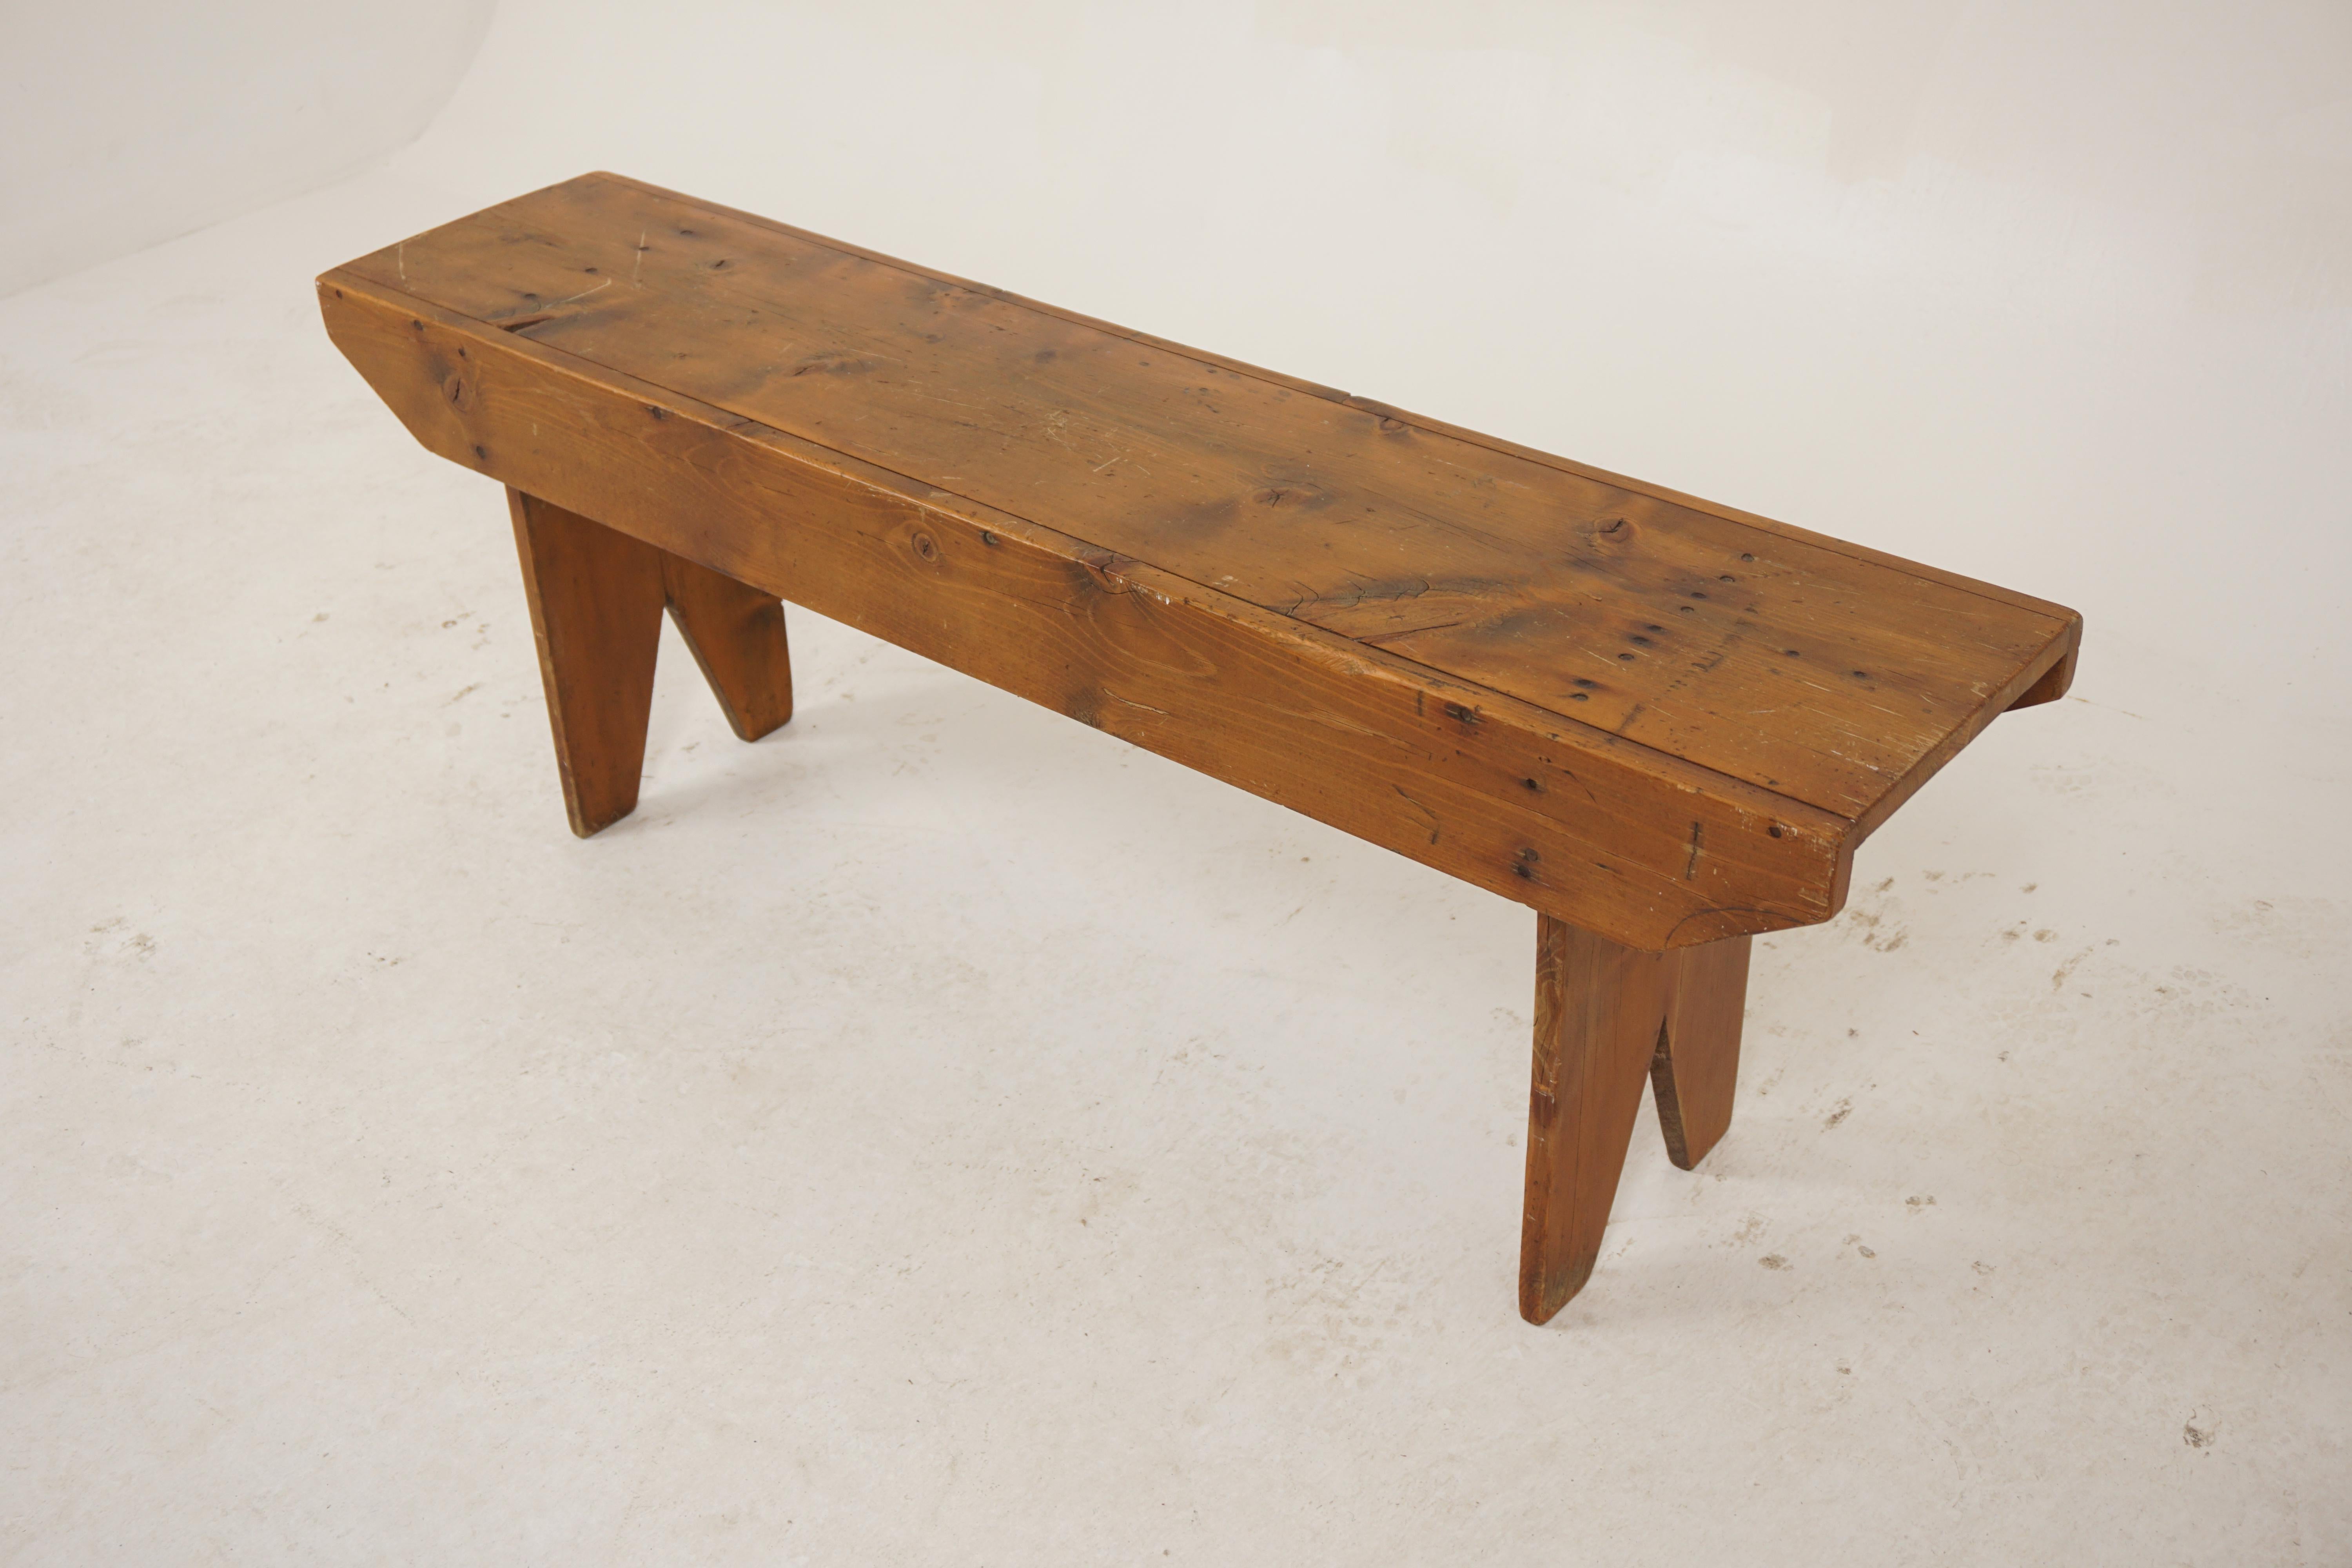 Vintage Pine farmhouse bench

Scotland 1930
Solid Pine
Original Finish
Single plank top with a deep frieze underneath
With recessed shaped legs
Solidly jointed
Great colour and patina
Perfect as a kitchen, hallway or general